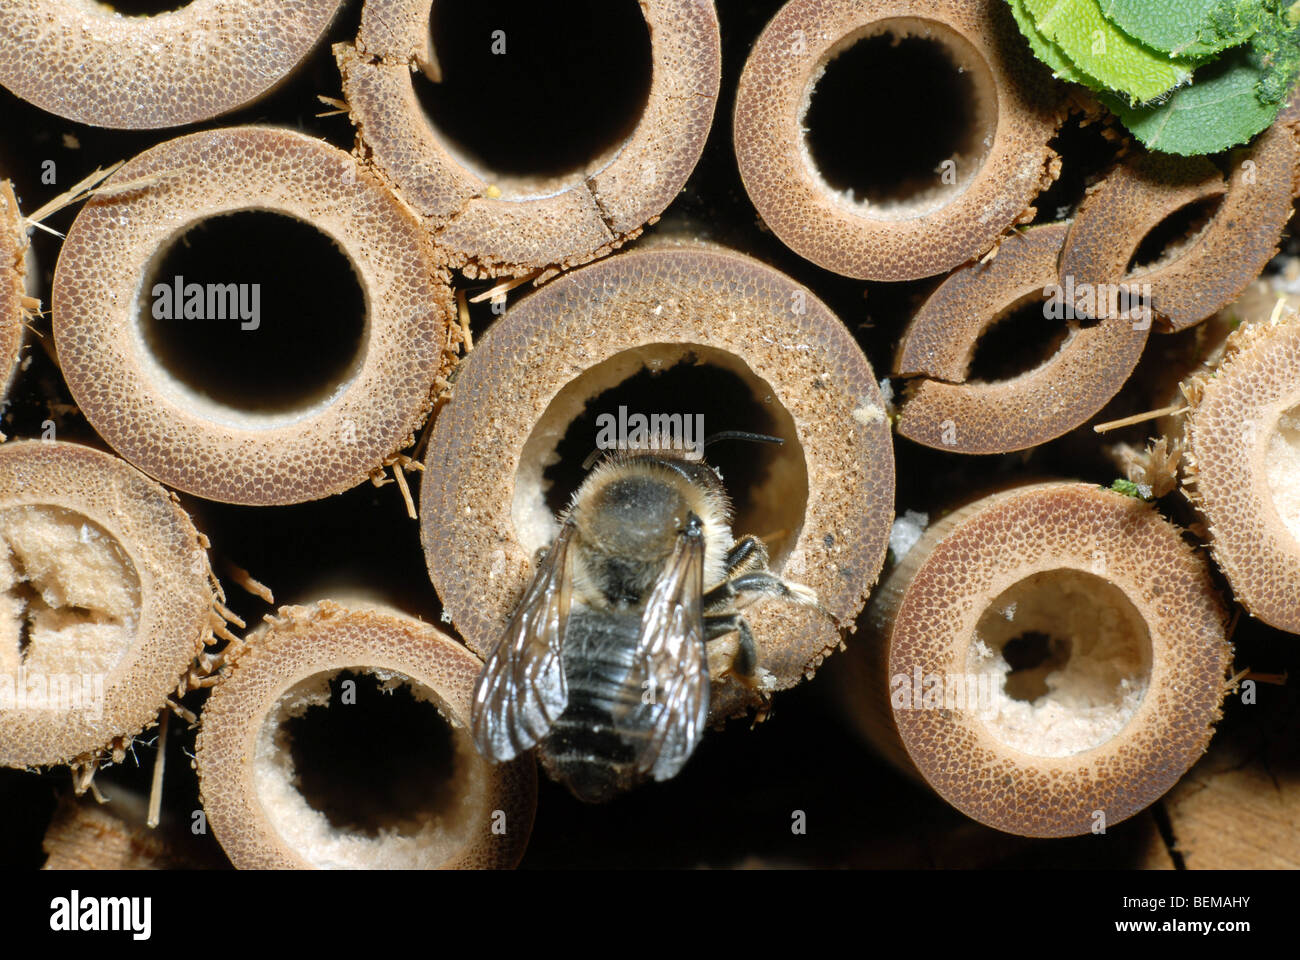 A leafcutter bee, Megachile centuncularis, on a bamboo home for solitary bees. Stock Photo